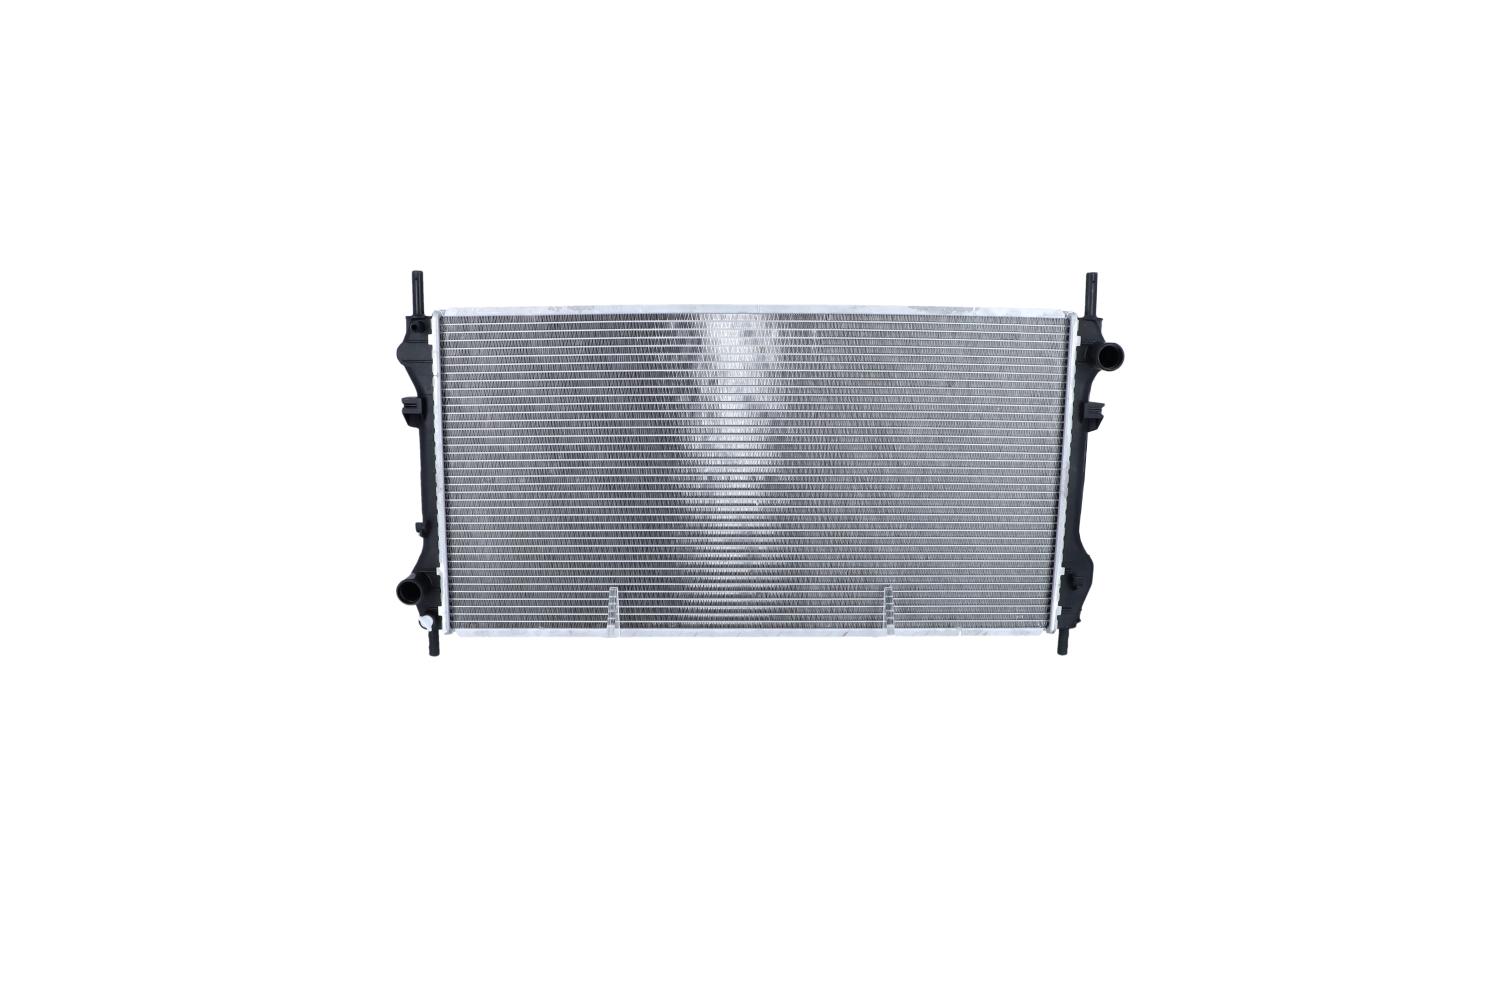 NRF Aluminium, 770 x 396 x 24 mm, with mounting parts, Brazed cooling fins Radiator 519697 buy